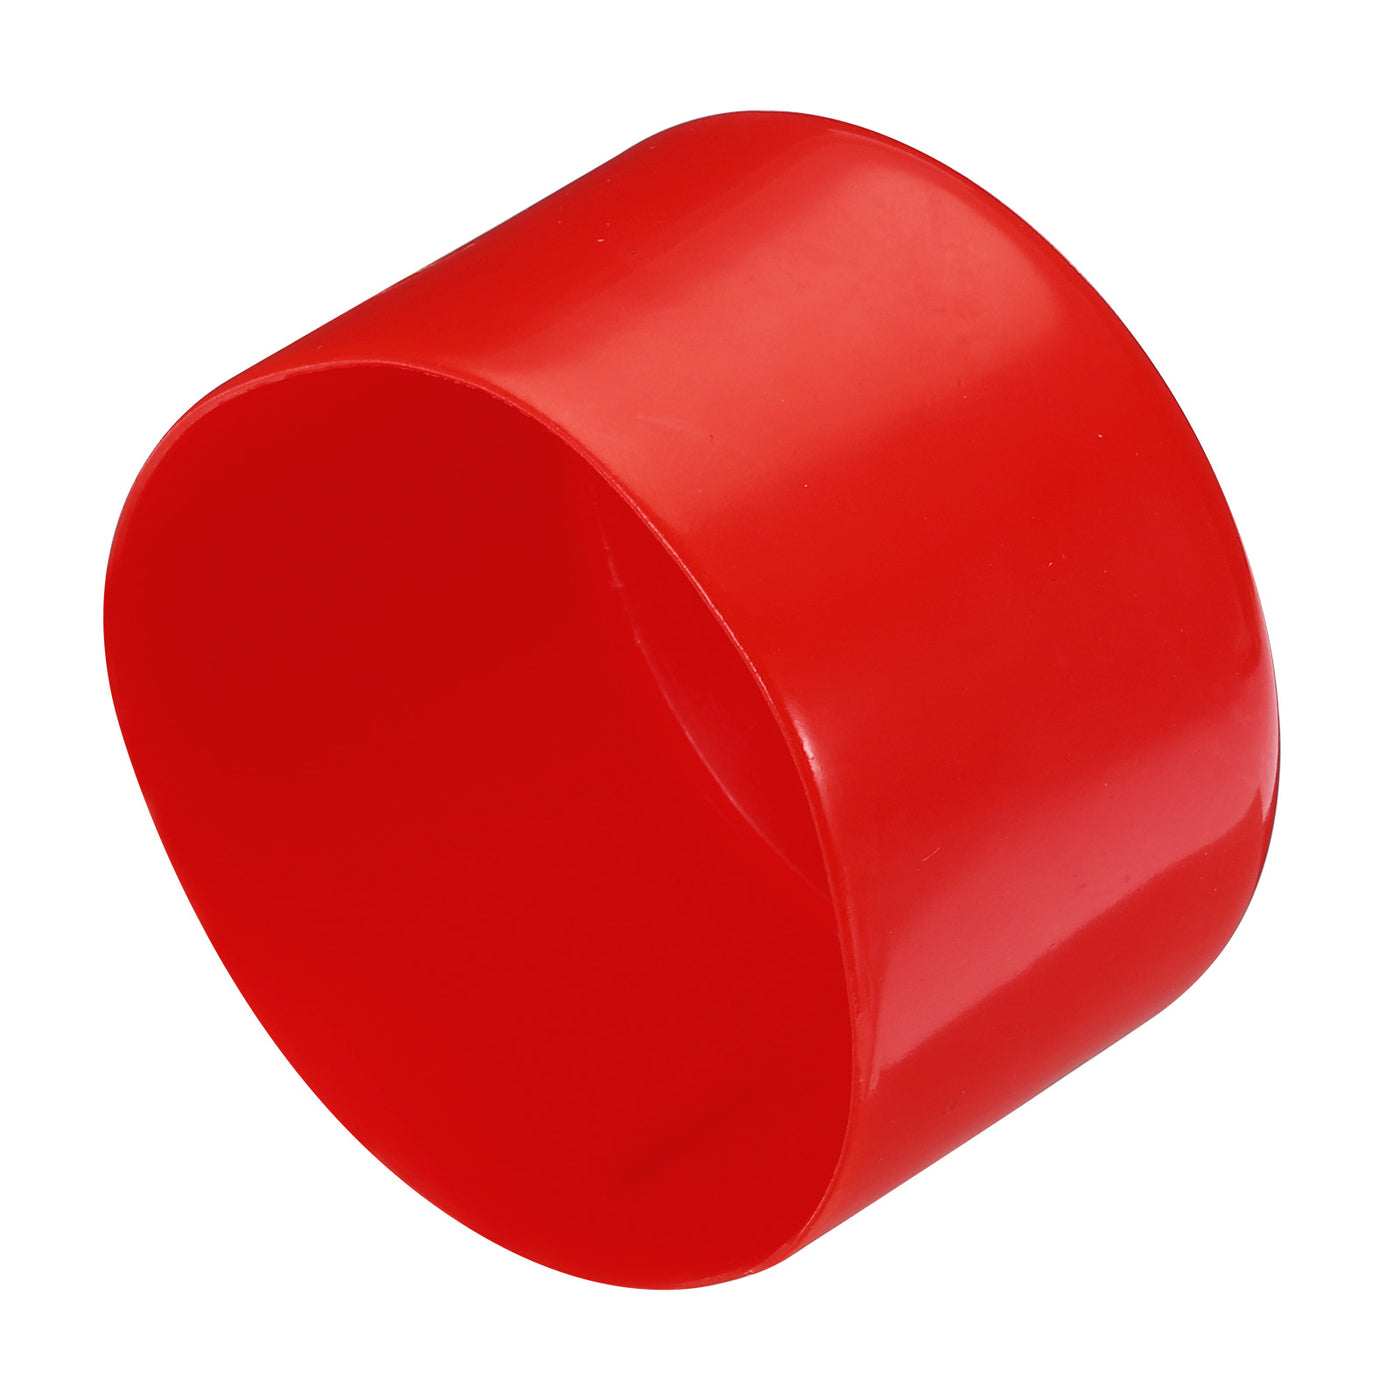 uxcell Uxcell 2pcs Rubber End Caps 100mm ID Vinyl Round Tube Bolt Cap Cover Screw Thread Protectors Red